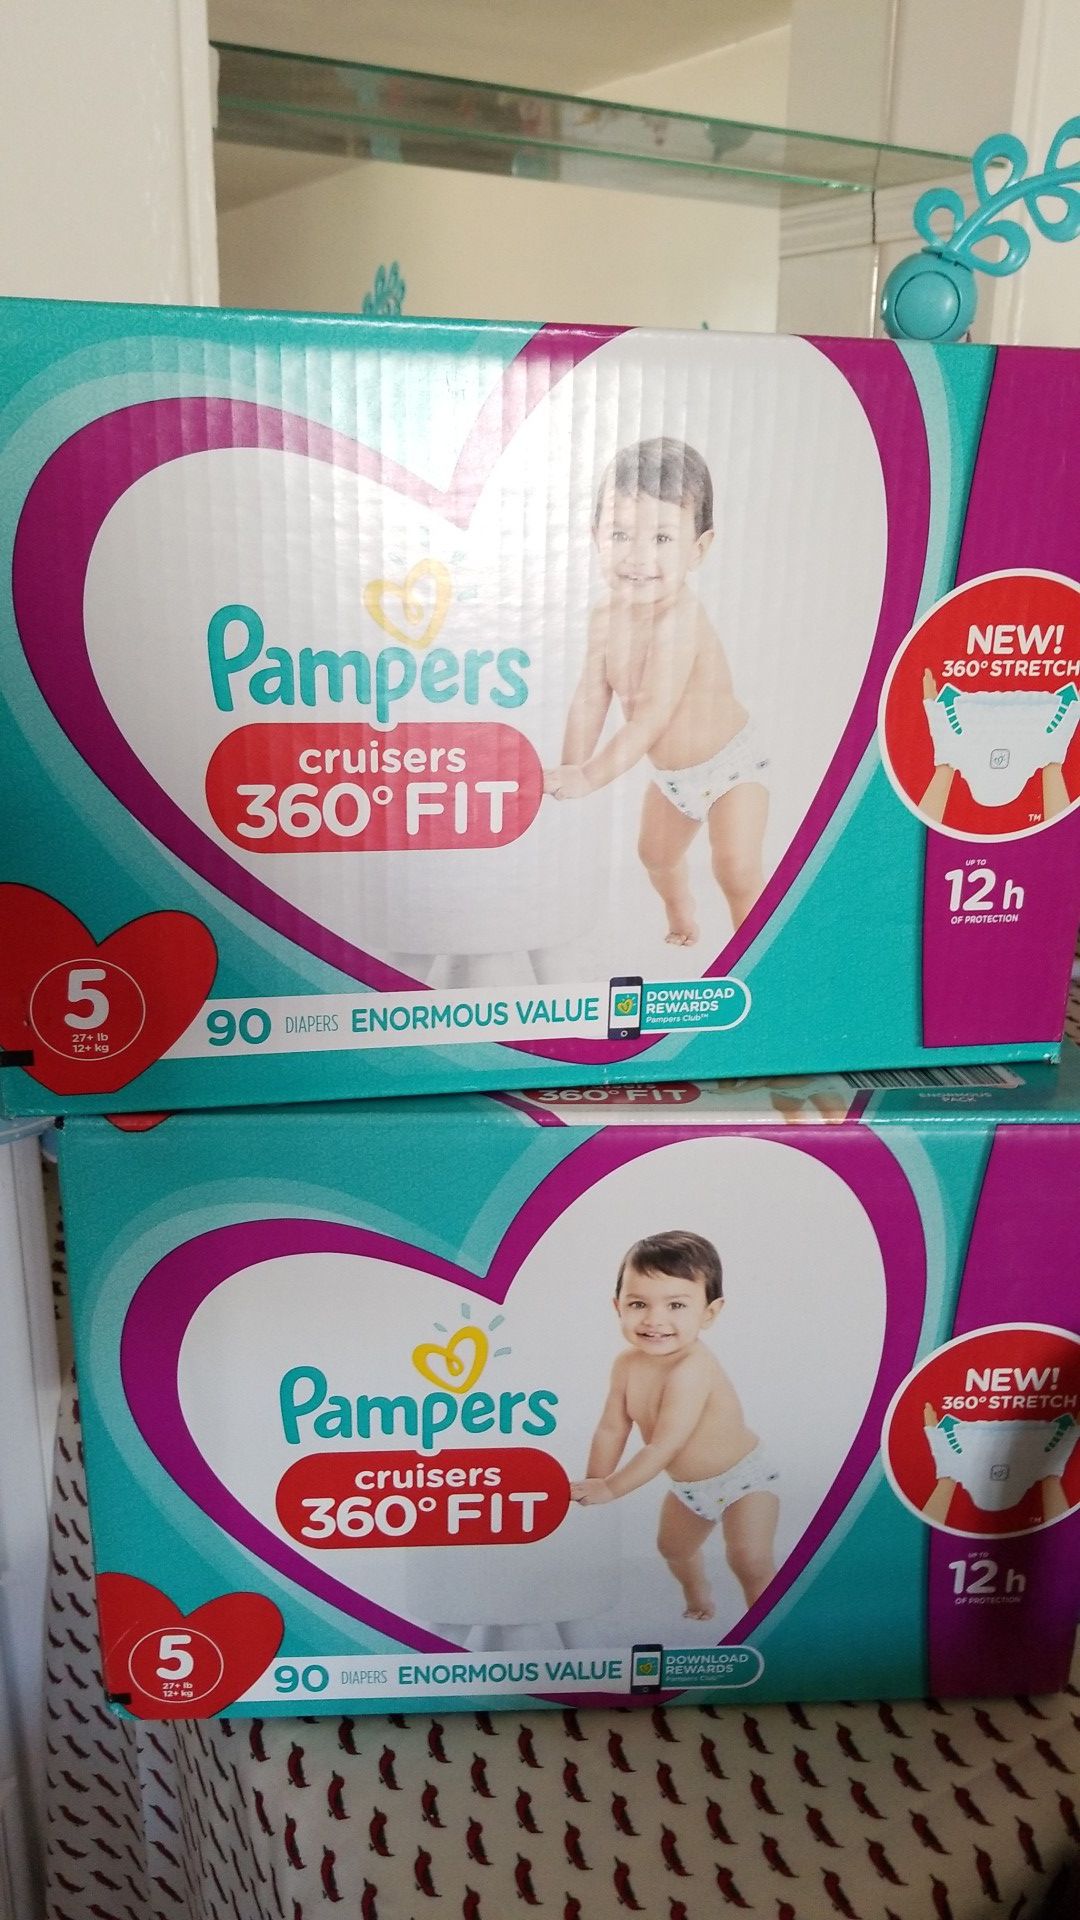 Pamper size 5 diapers